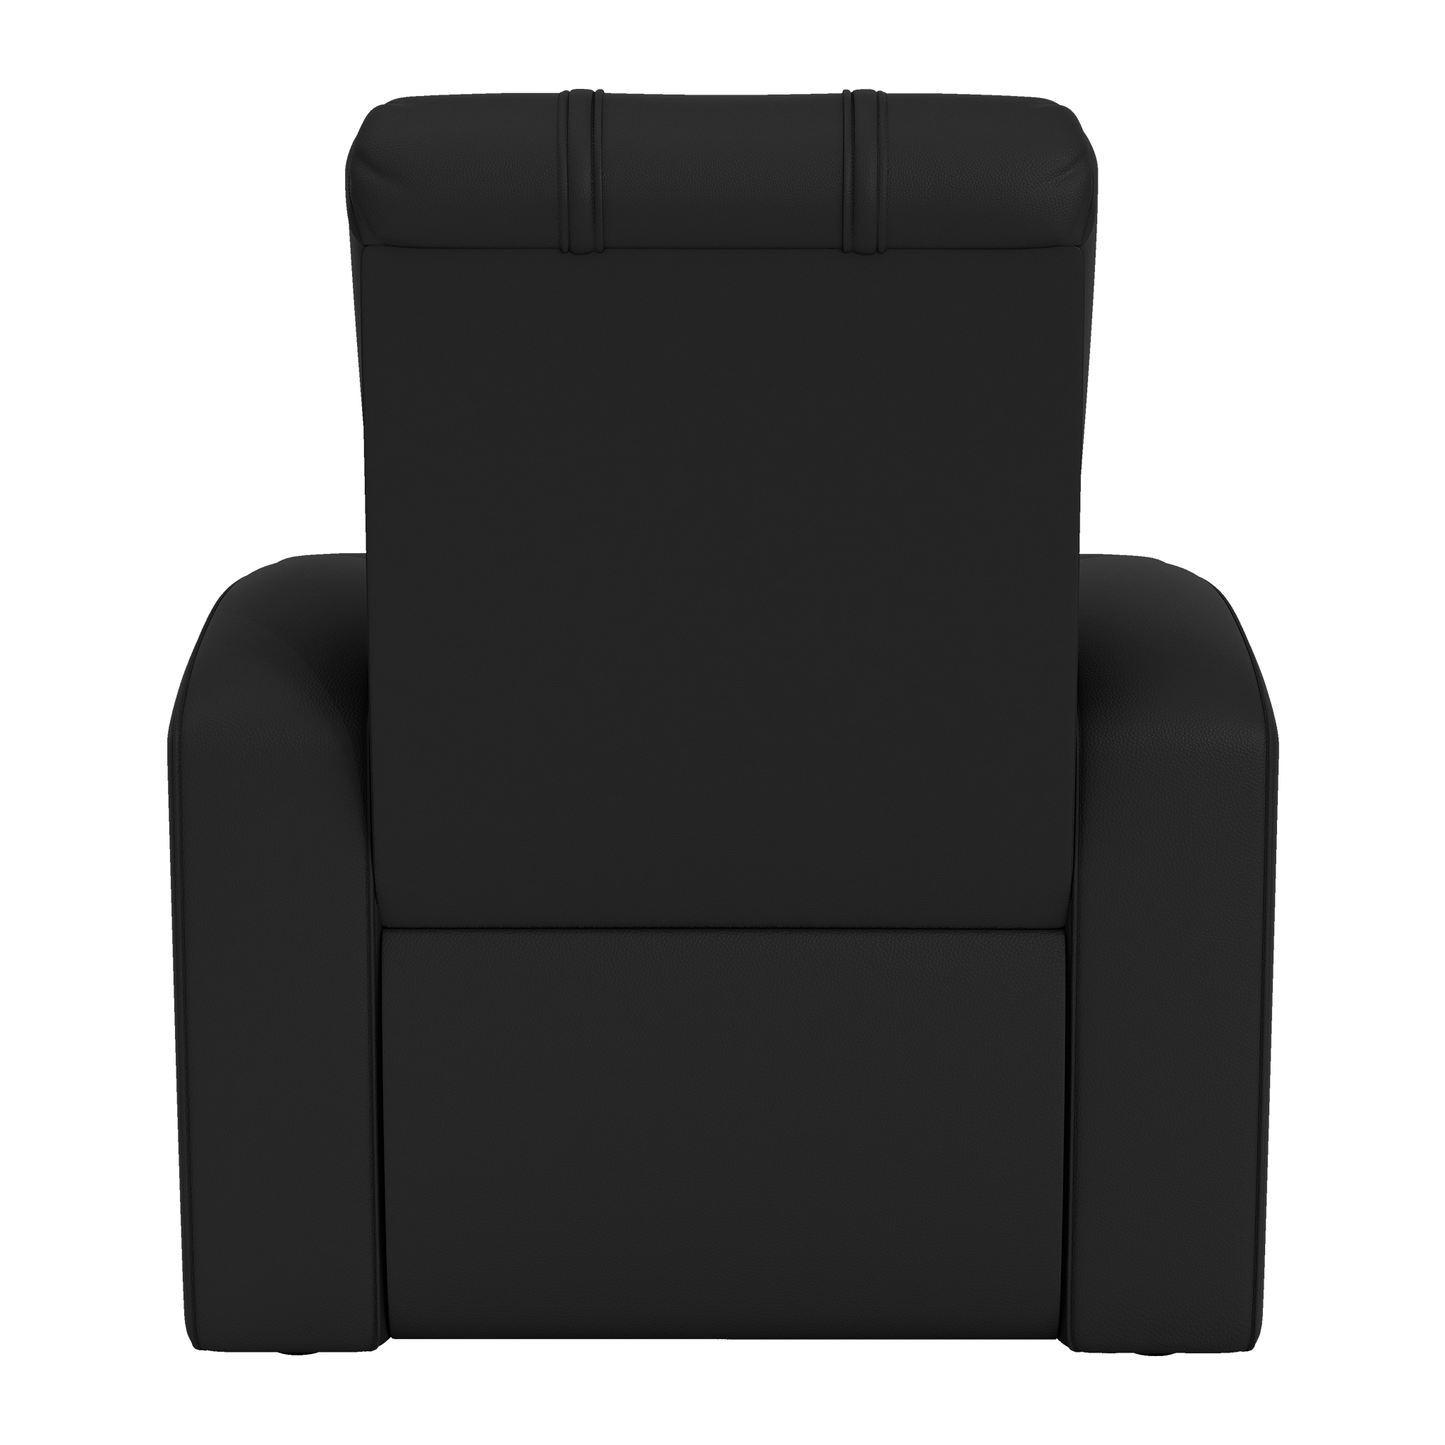 Relax Home Theater Recliner with Chicago Blackhawks Logo